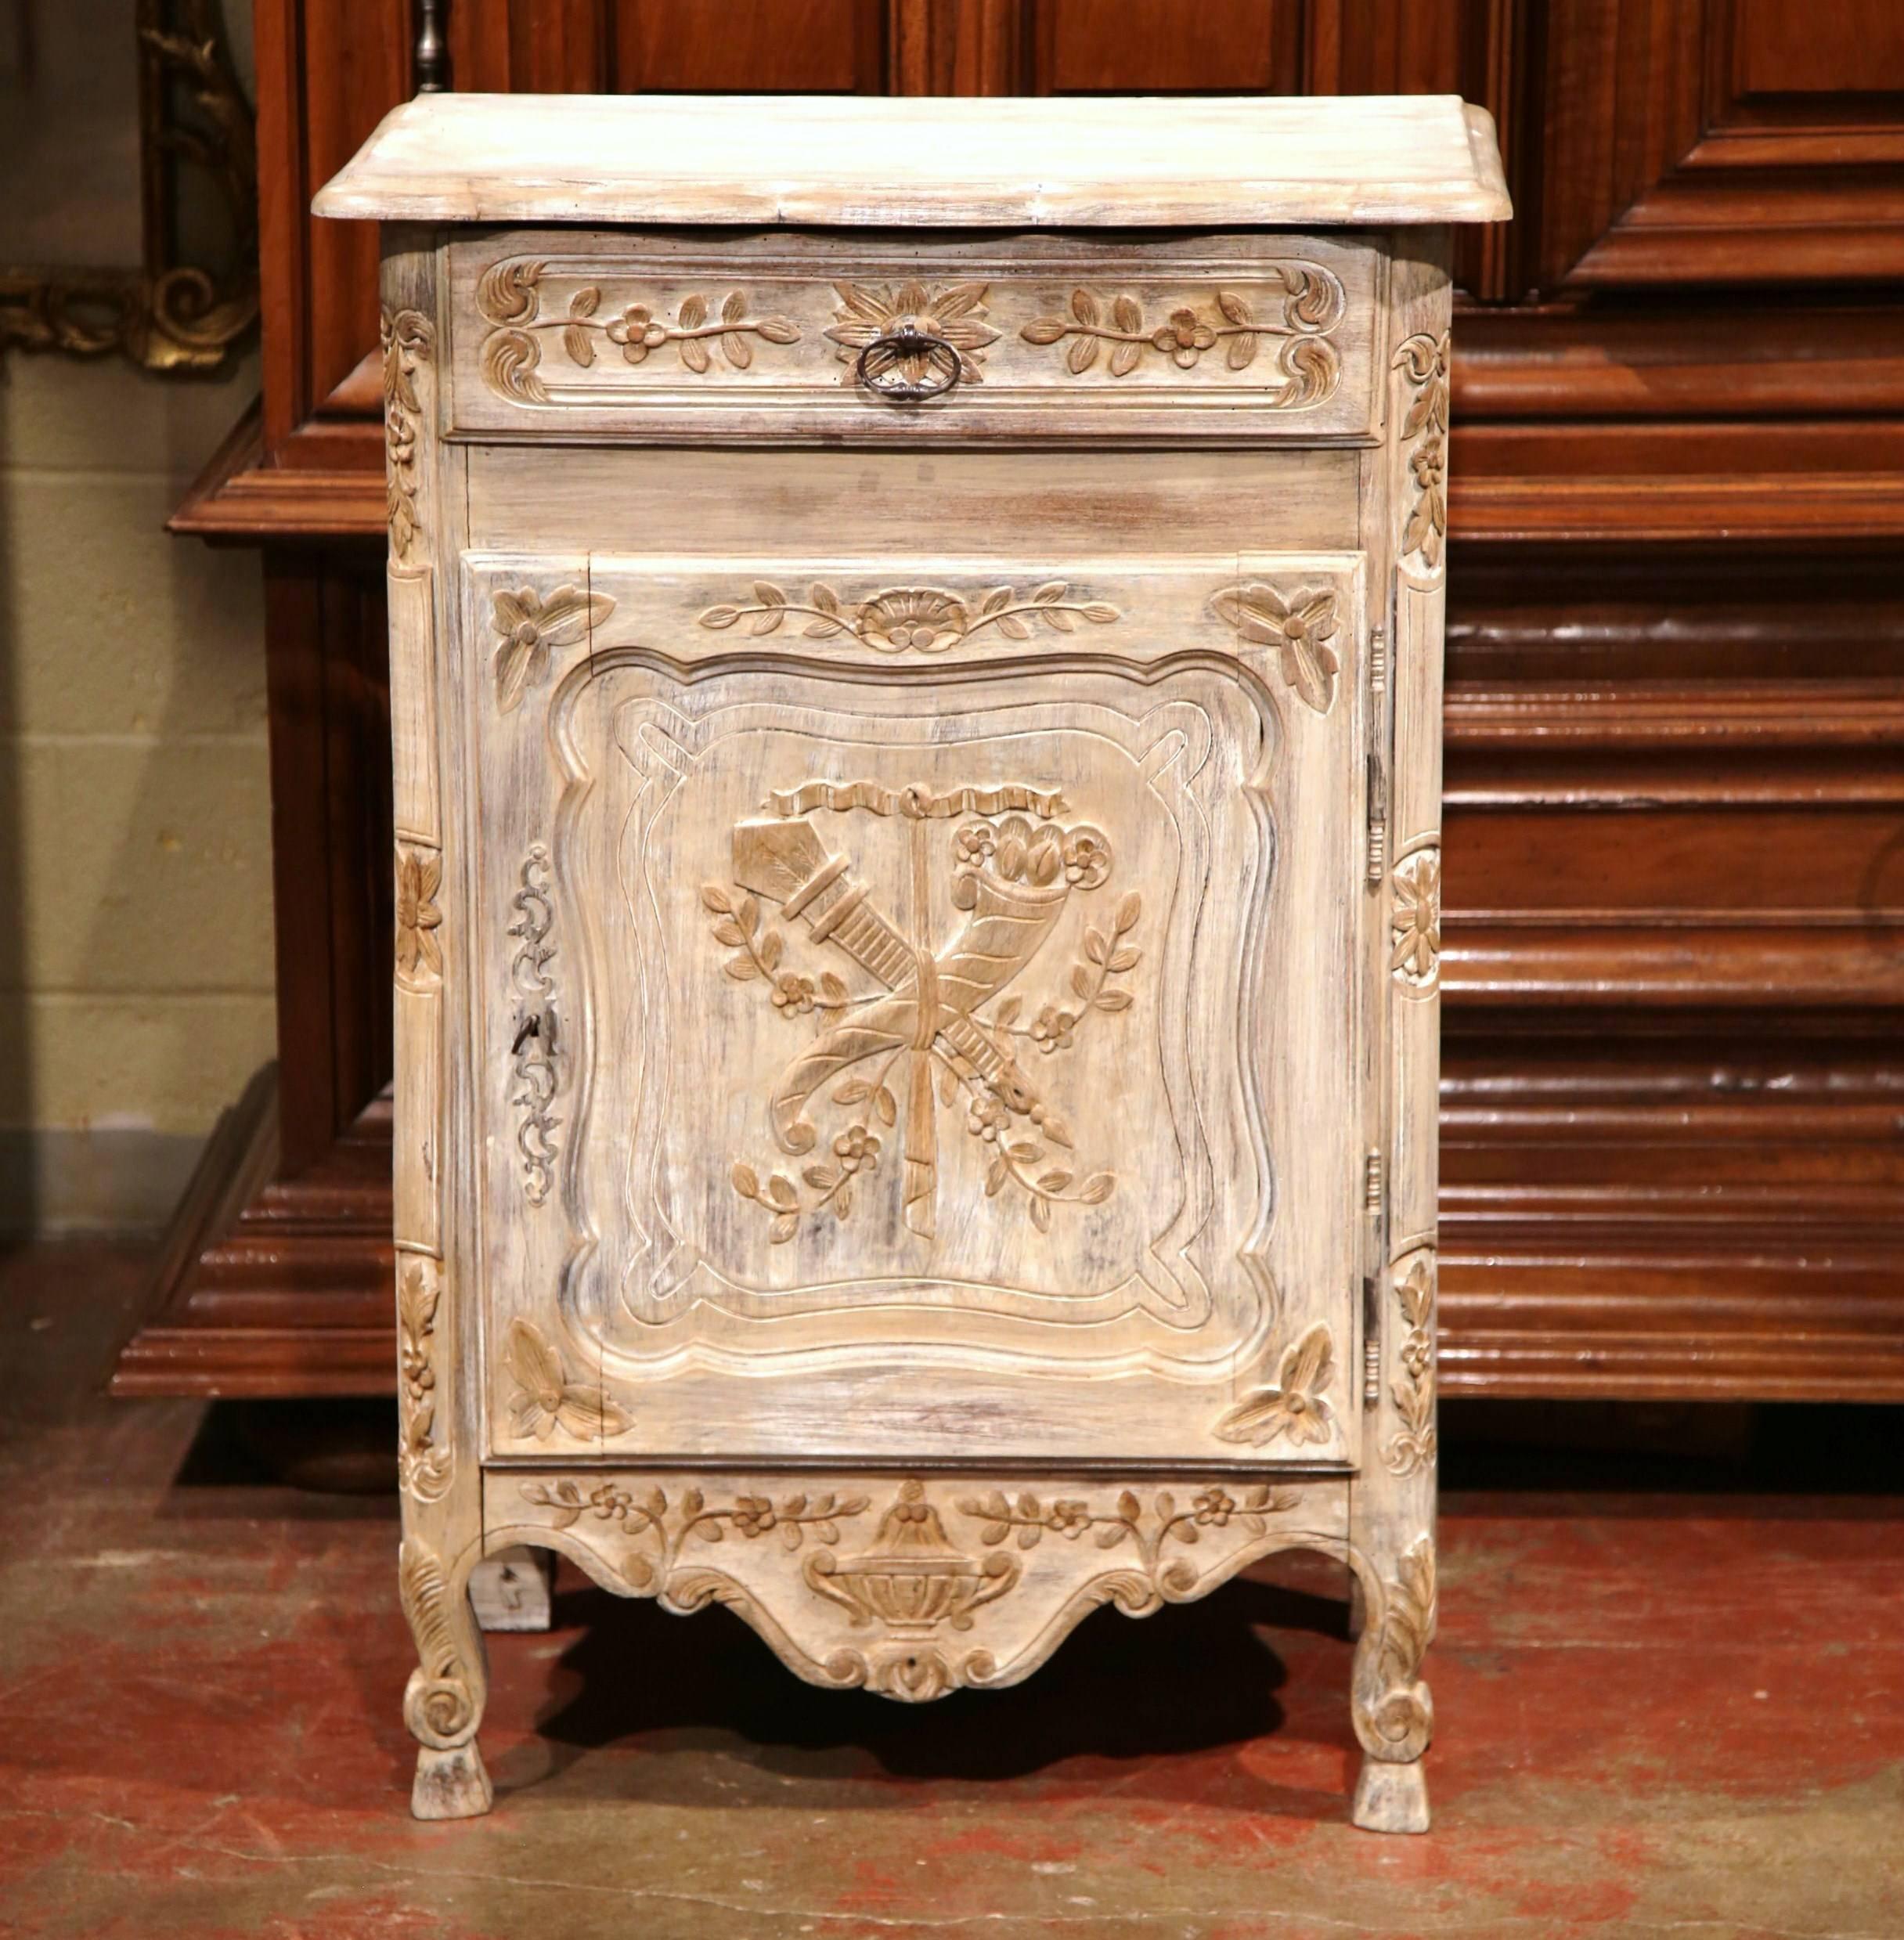 This elegant jelly cabinet was crafted in Northern France circa 1920. The heavily carved single door piece features delicate hand carvings on the front door and drawer with scrolled feet at the base. The confiturier is painted in a light bleached